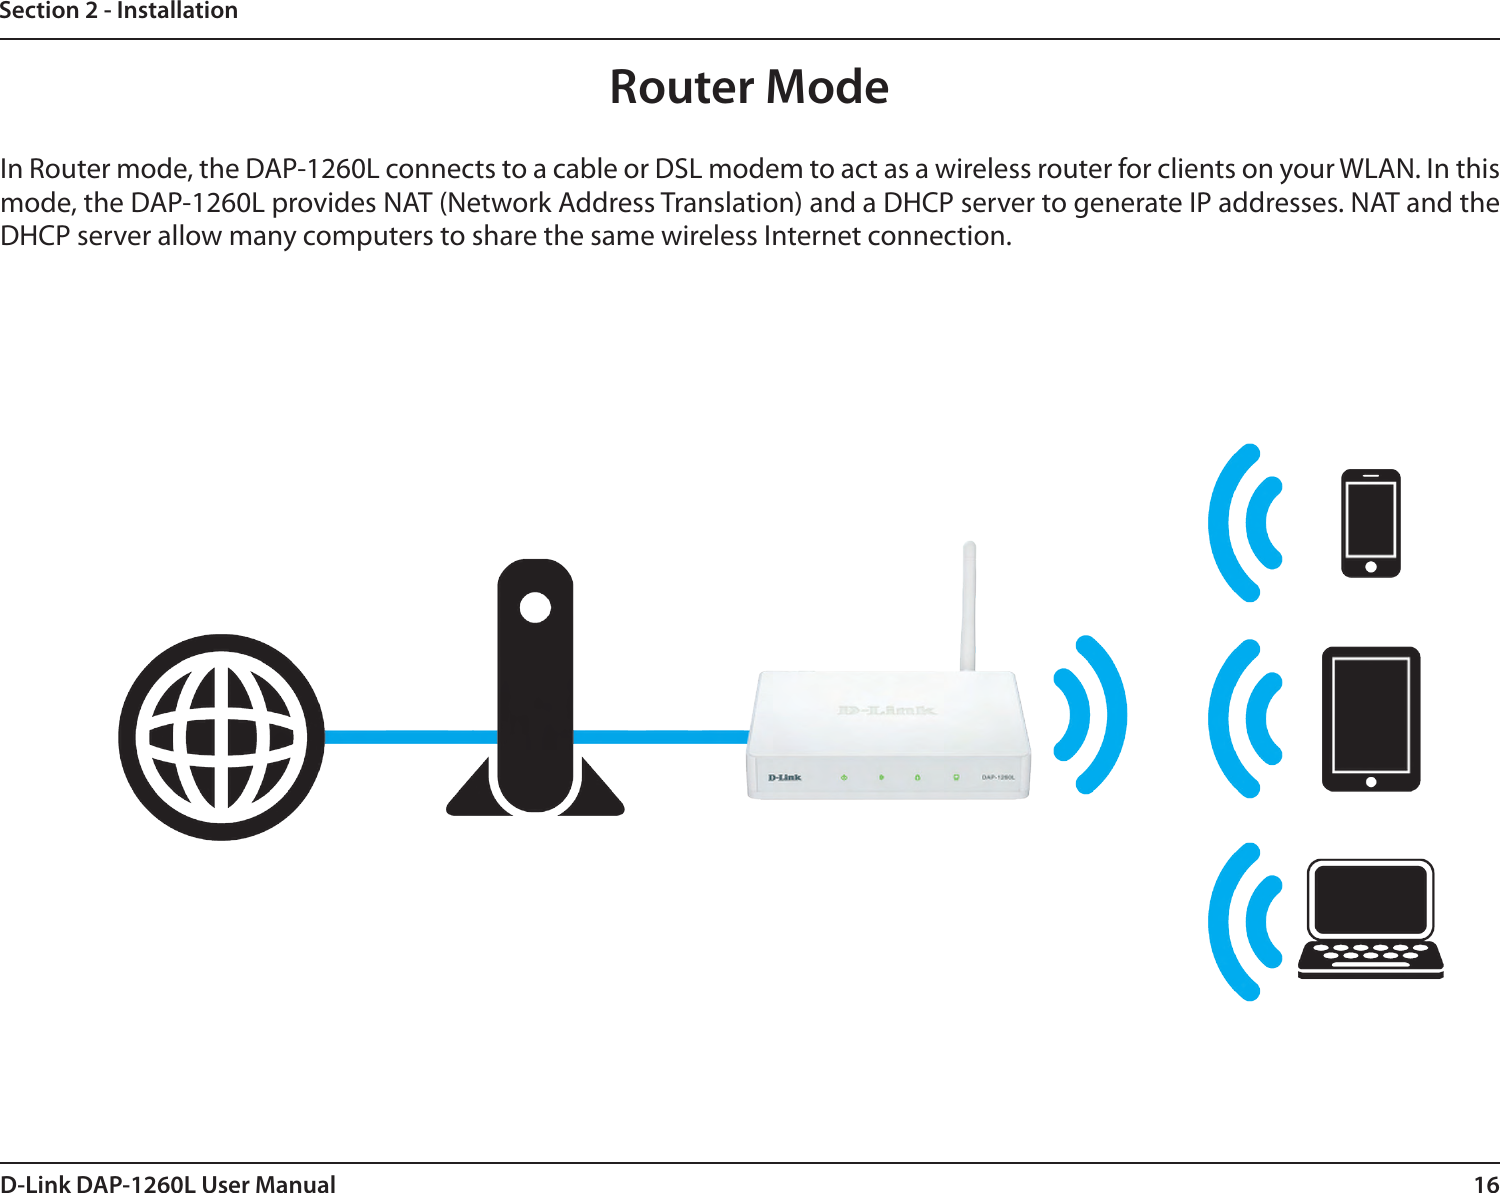 16D-Link DAP-1260L User ManualSection 2 - InstallationRouter ModeIn Router mode, the DAP-1260L connects to a cable or DSL modem to act as a wireless router for clients on your WLAN. In this mode, the DAP-1260L provides NAT (Network Address Translation) and a DHCP server to generate IP addresses. NAT and the DHCP server allow many computers to share the same wireless Internet connection.